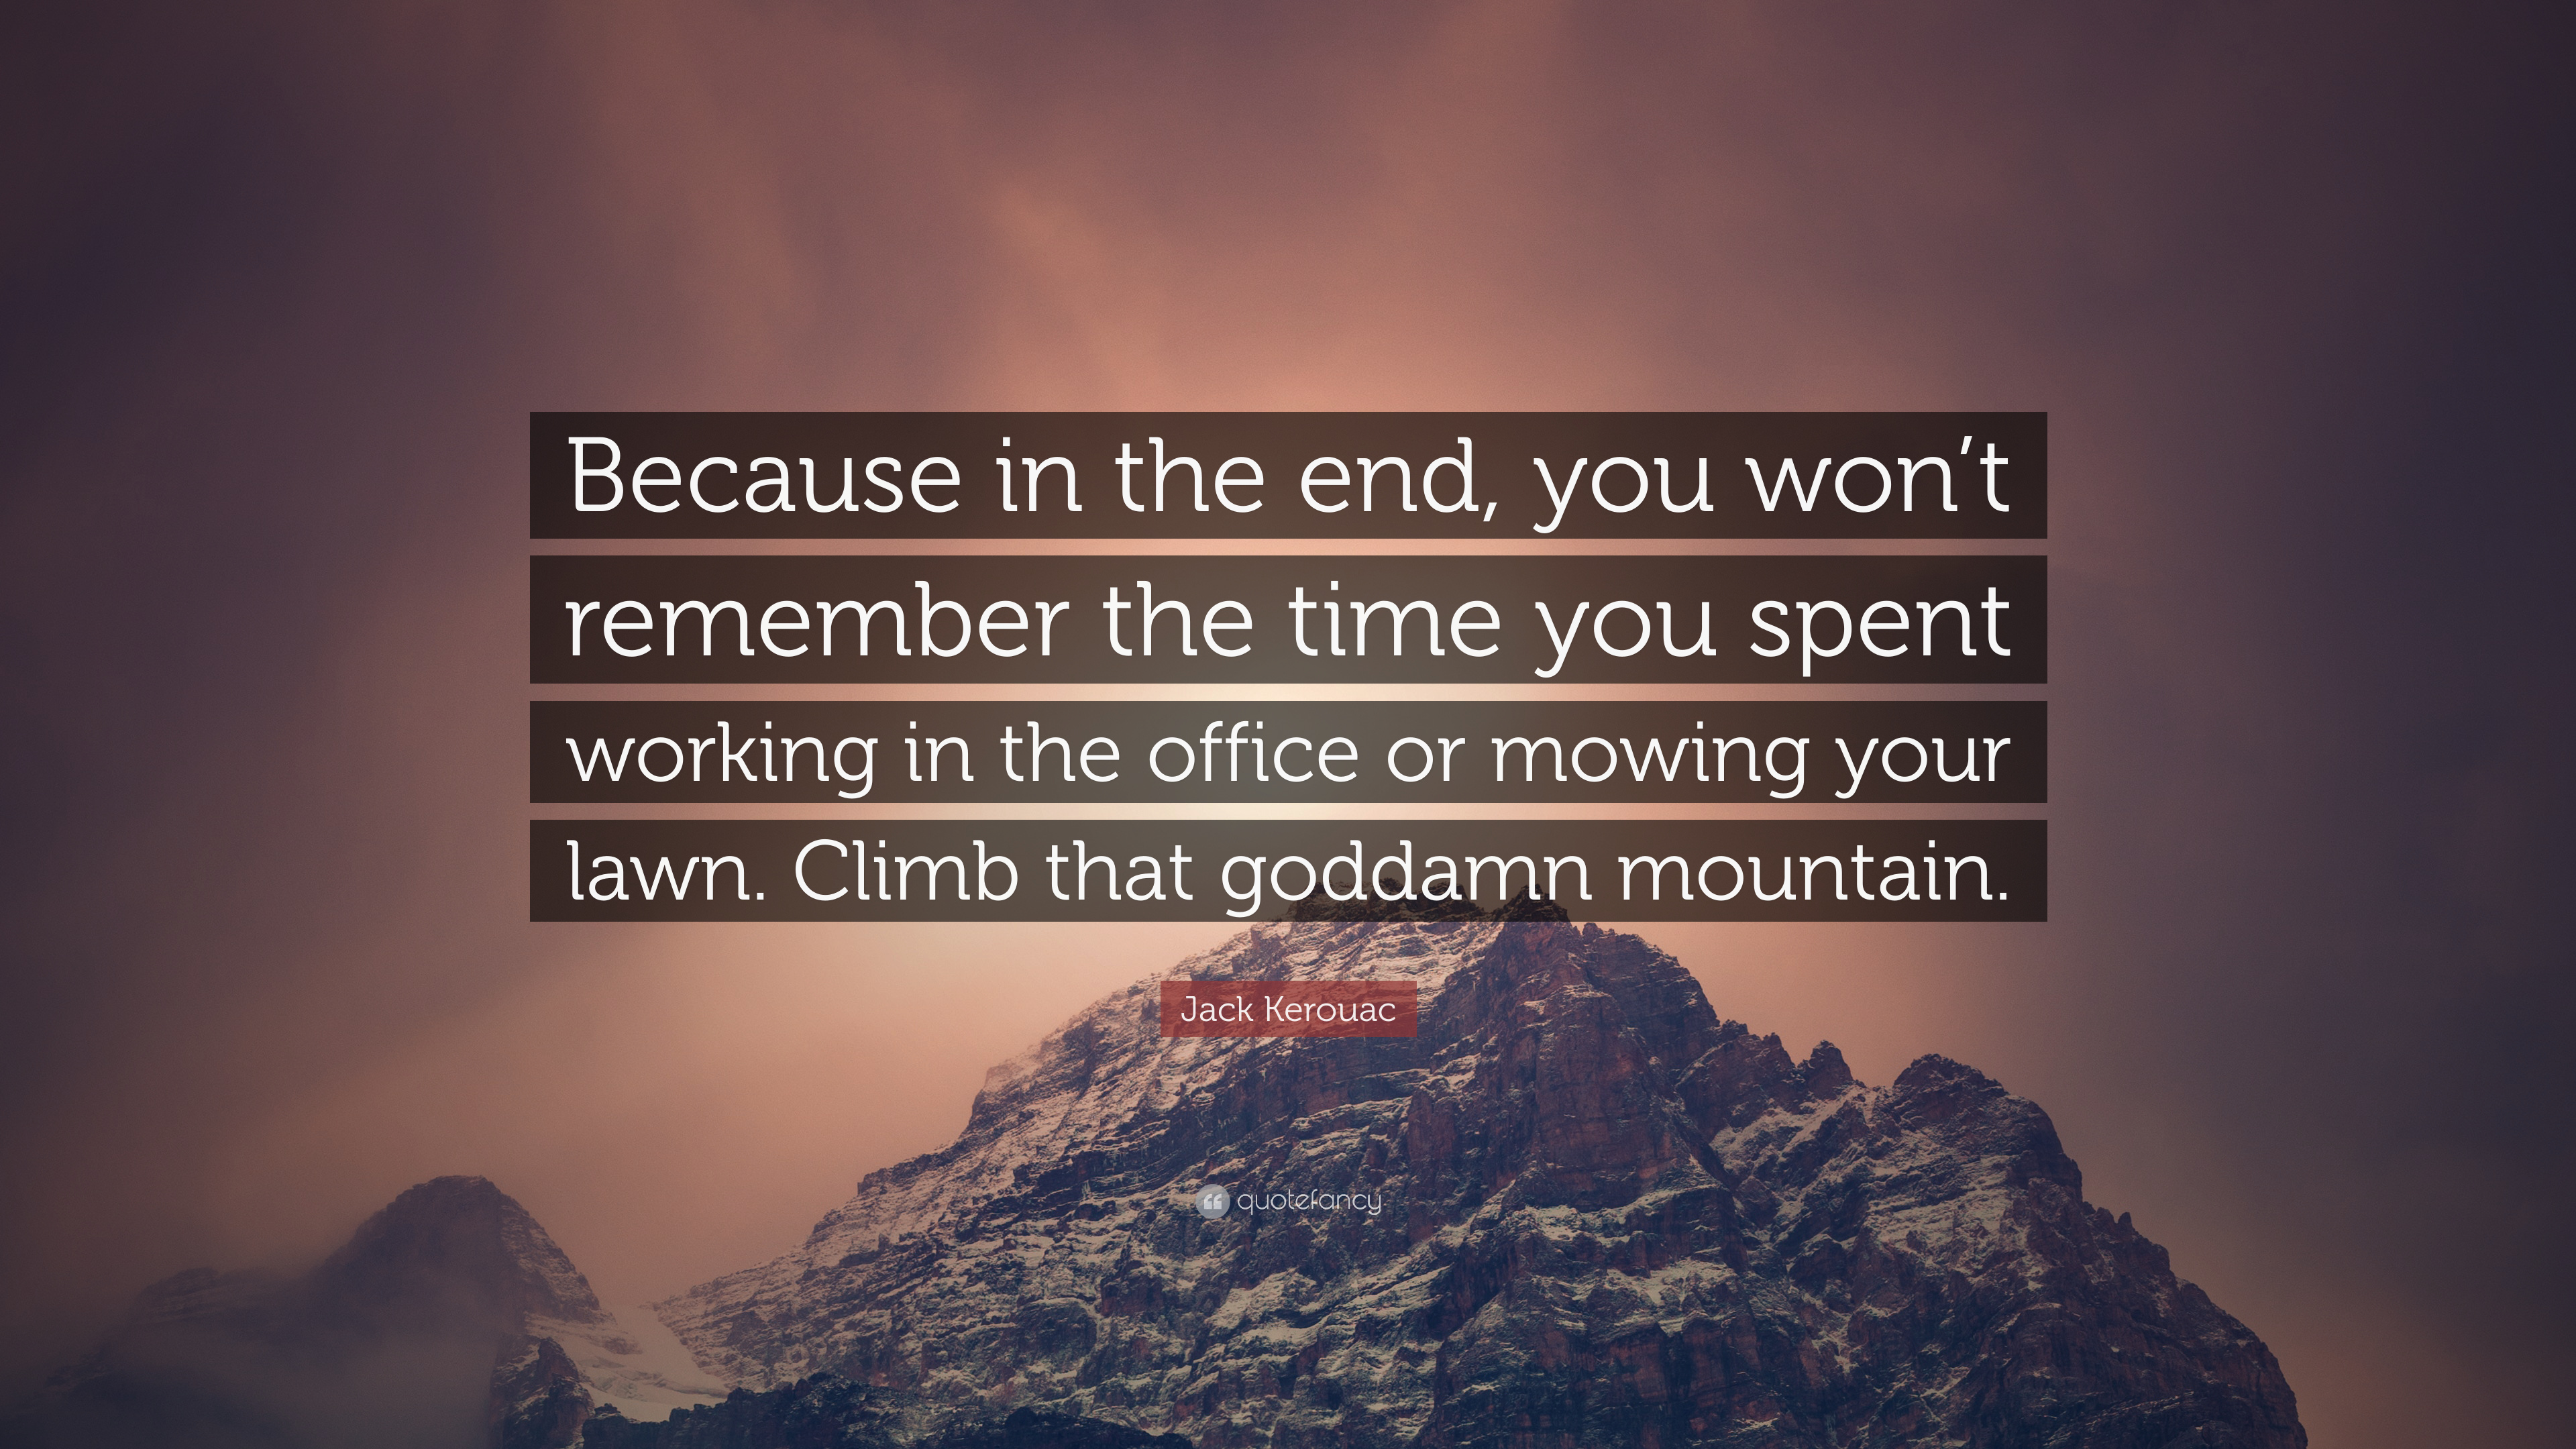 General 3840x2160 quote quotefancy text positive nature Jack Kerouac mountains motivational snow digital art watermarked